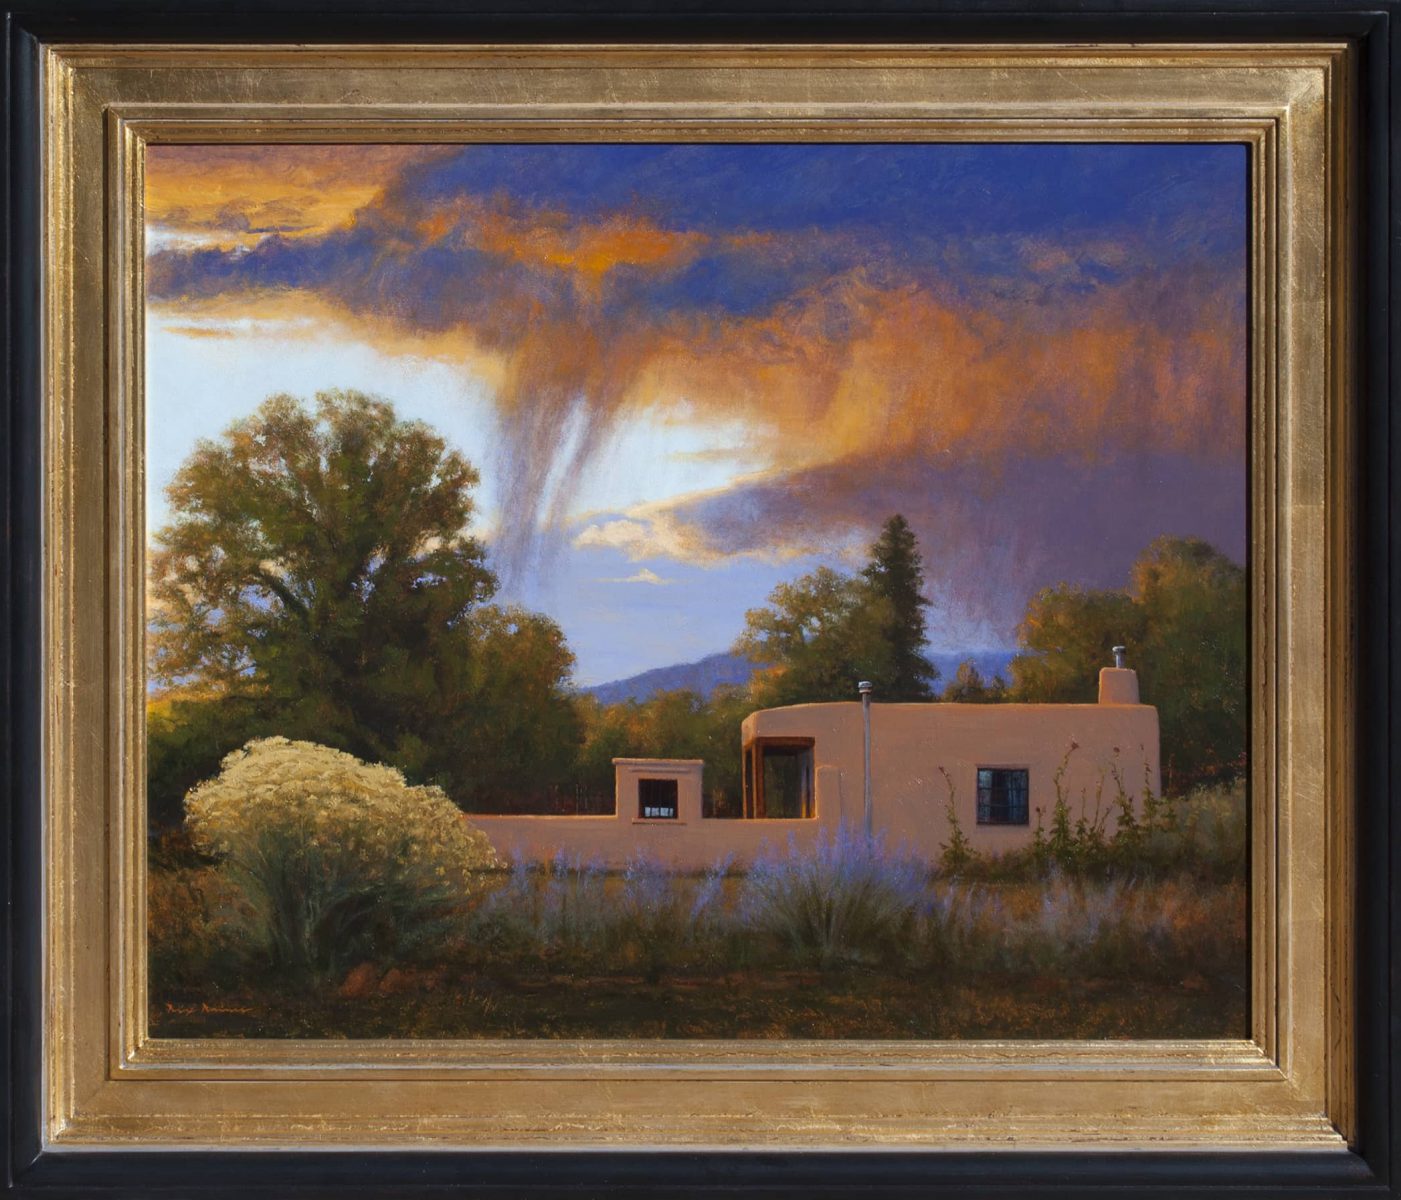 Adobe and Virga painting by Dix Baines